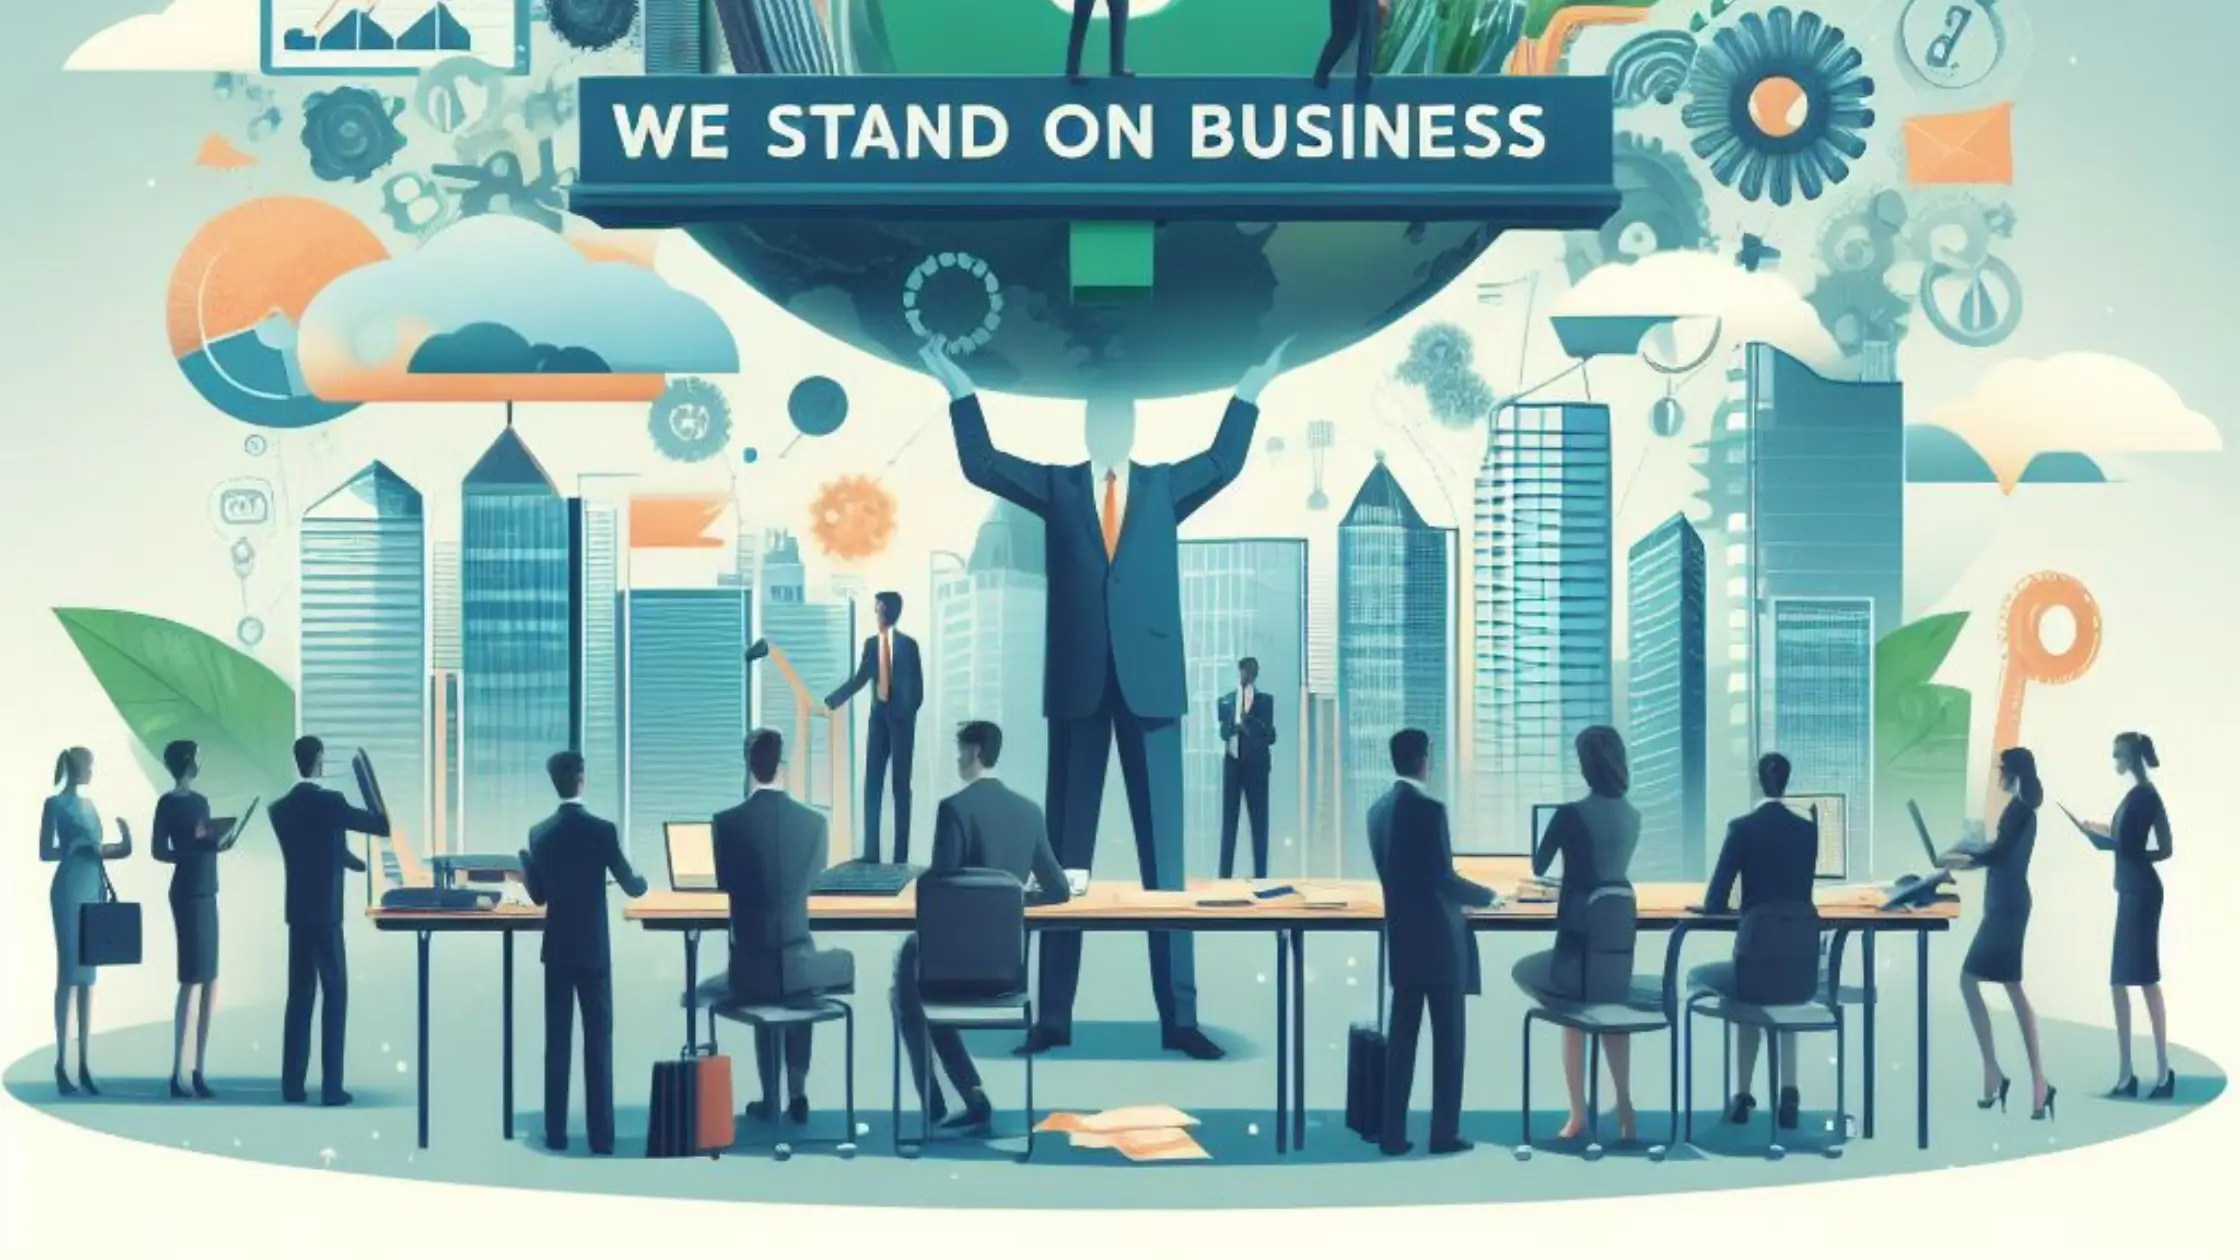 We Stand on Business